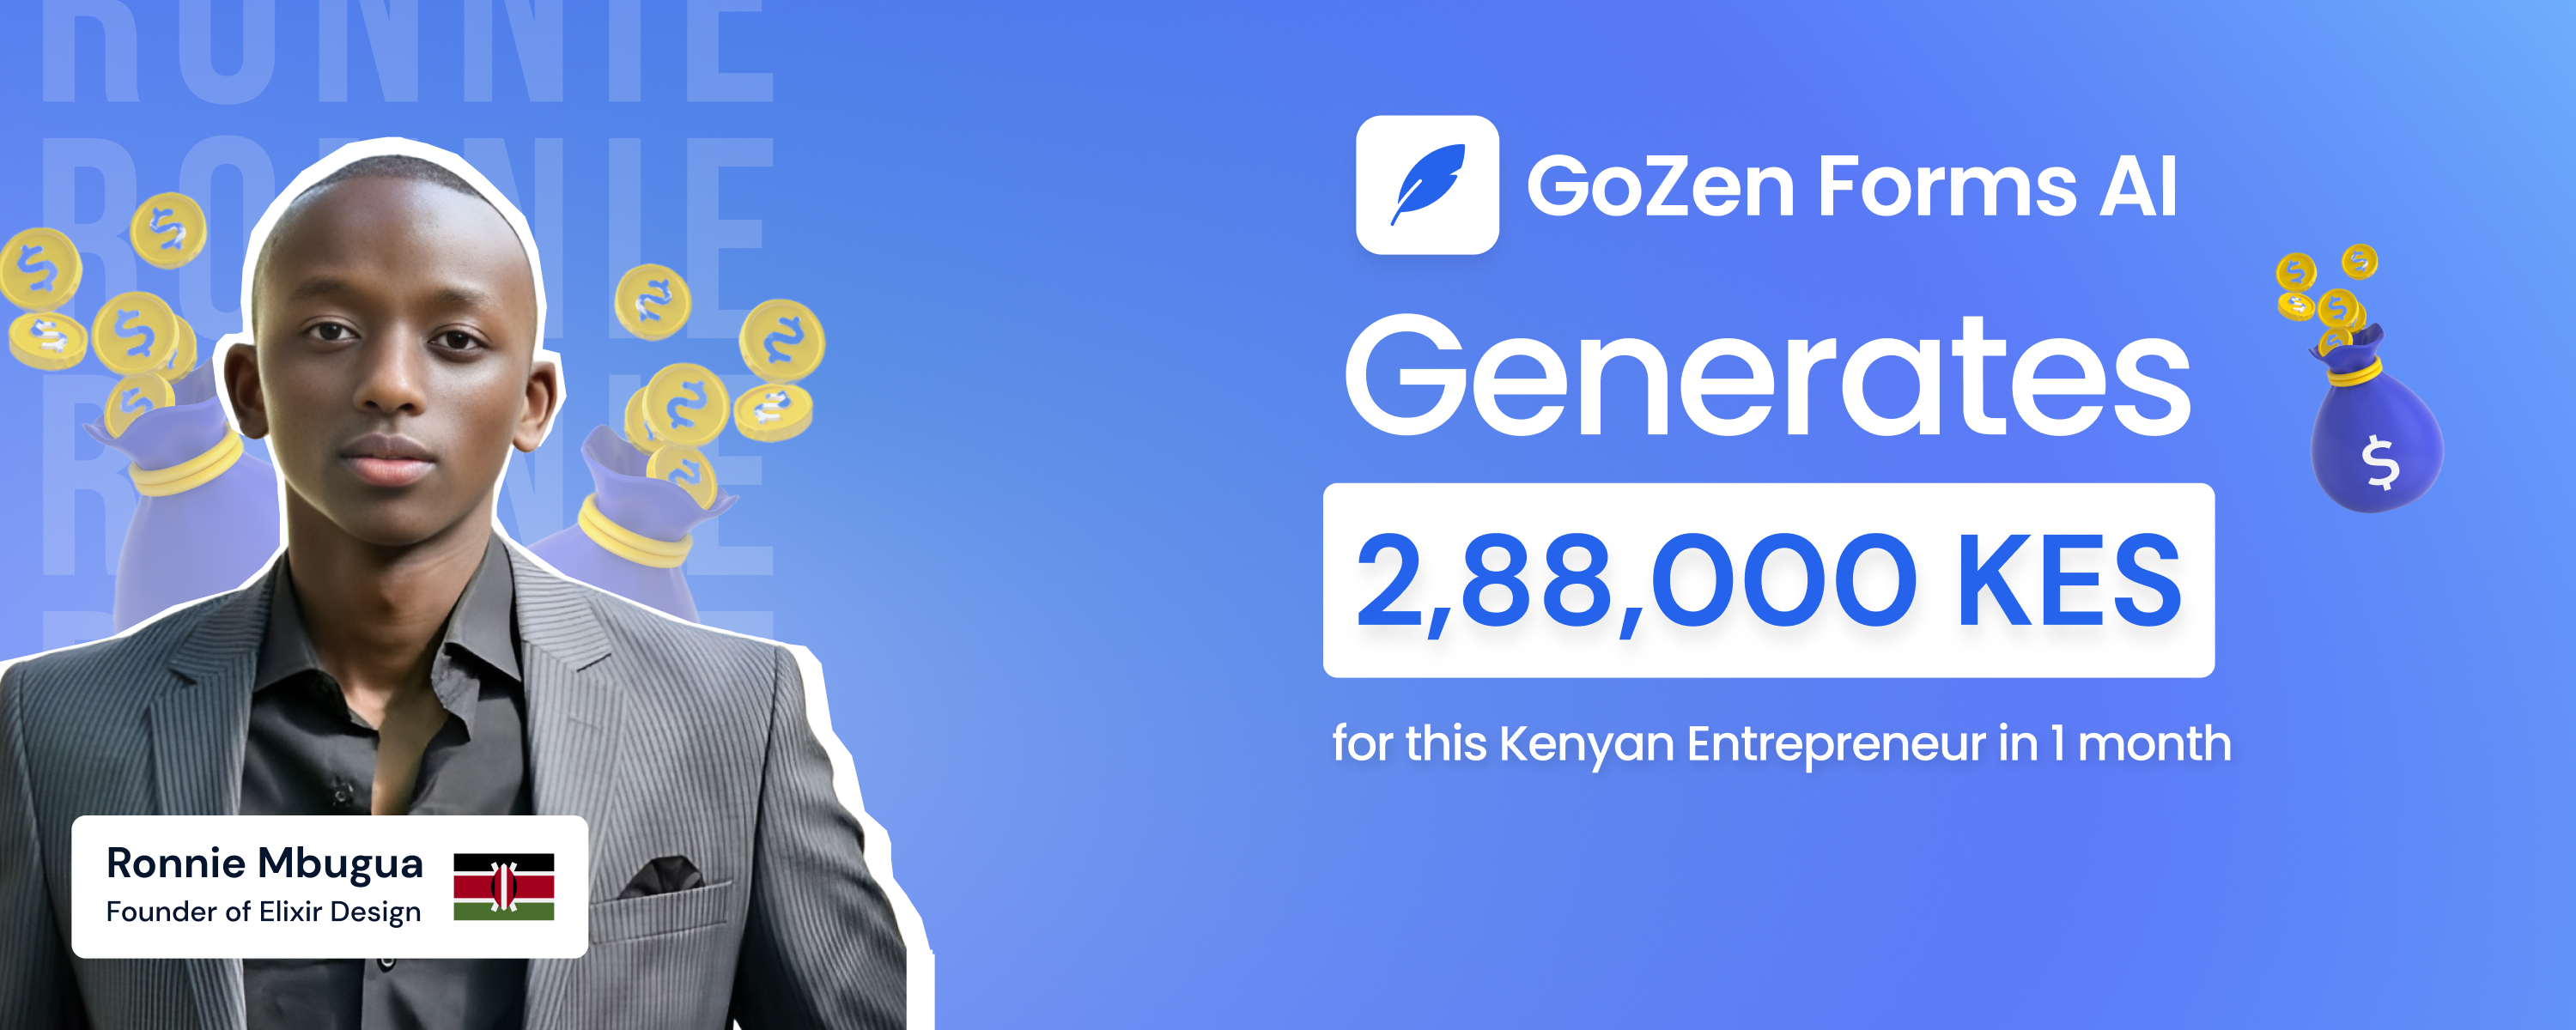 He earns 2,80,000 KES using GoZen Forms Ai in 1 month - Ronnie Mbugua, The Kenyan entrepreneur.